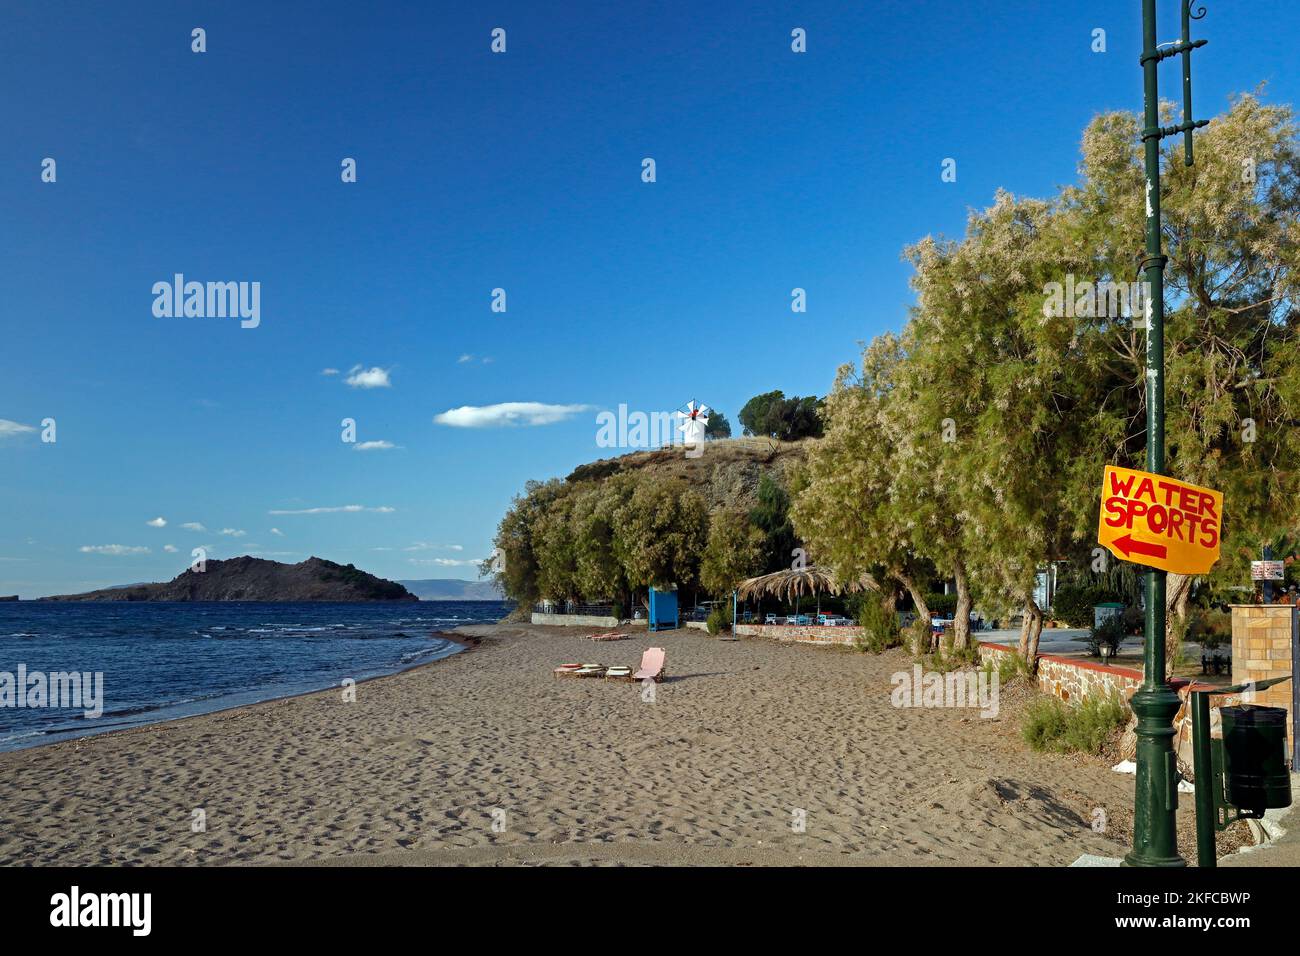 Water sports sign at Anaxos beach. Lesbos views October 2022. Autumn. End of tourist season, closing down for the winter. Stock Photo